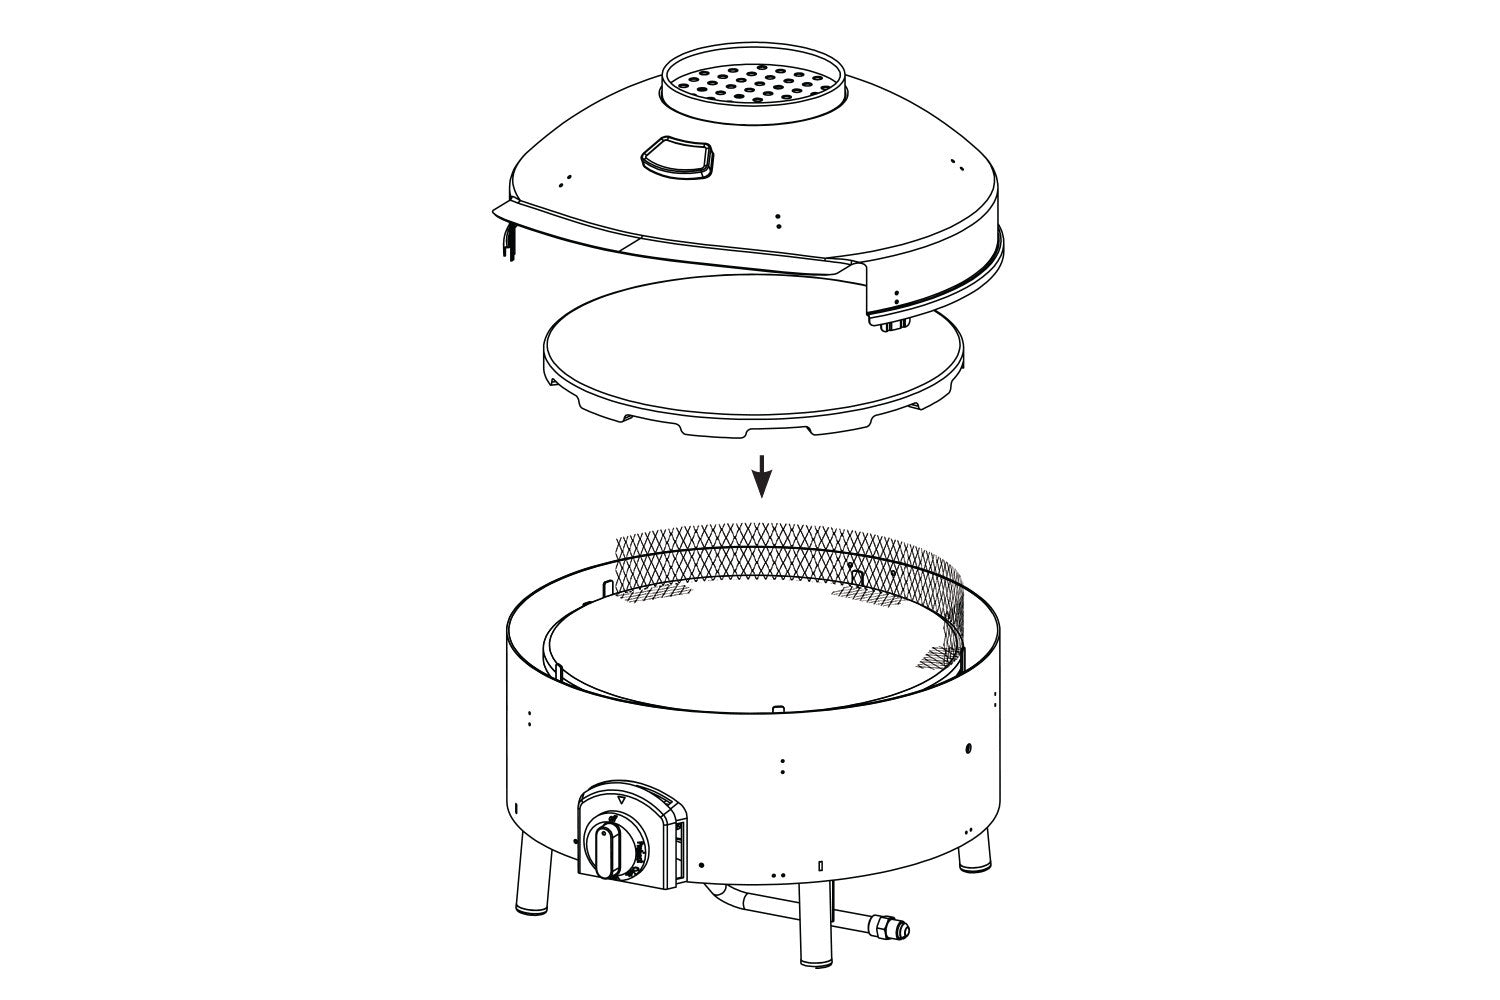 Diagram of Backstop in a Pizzacraft Pizza Oven